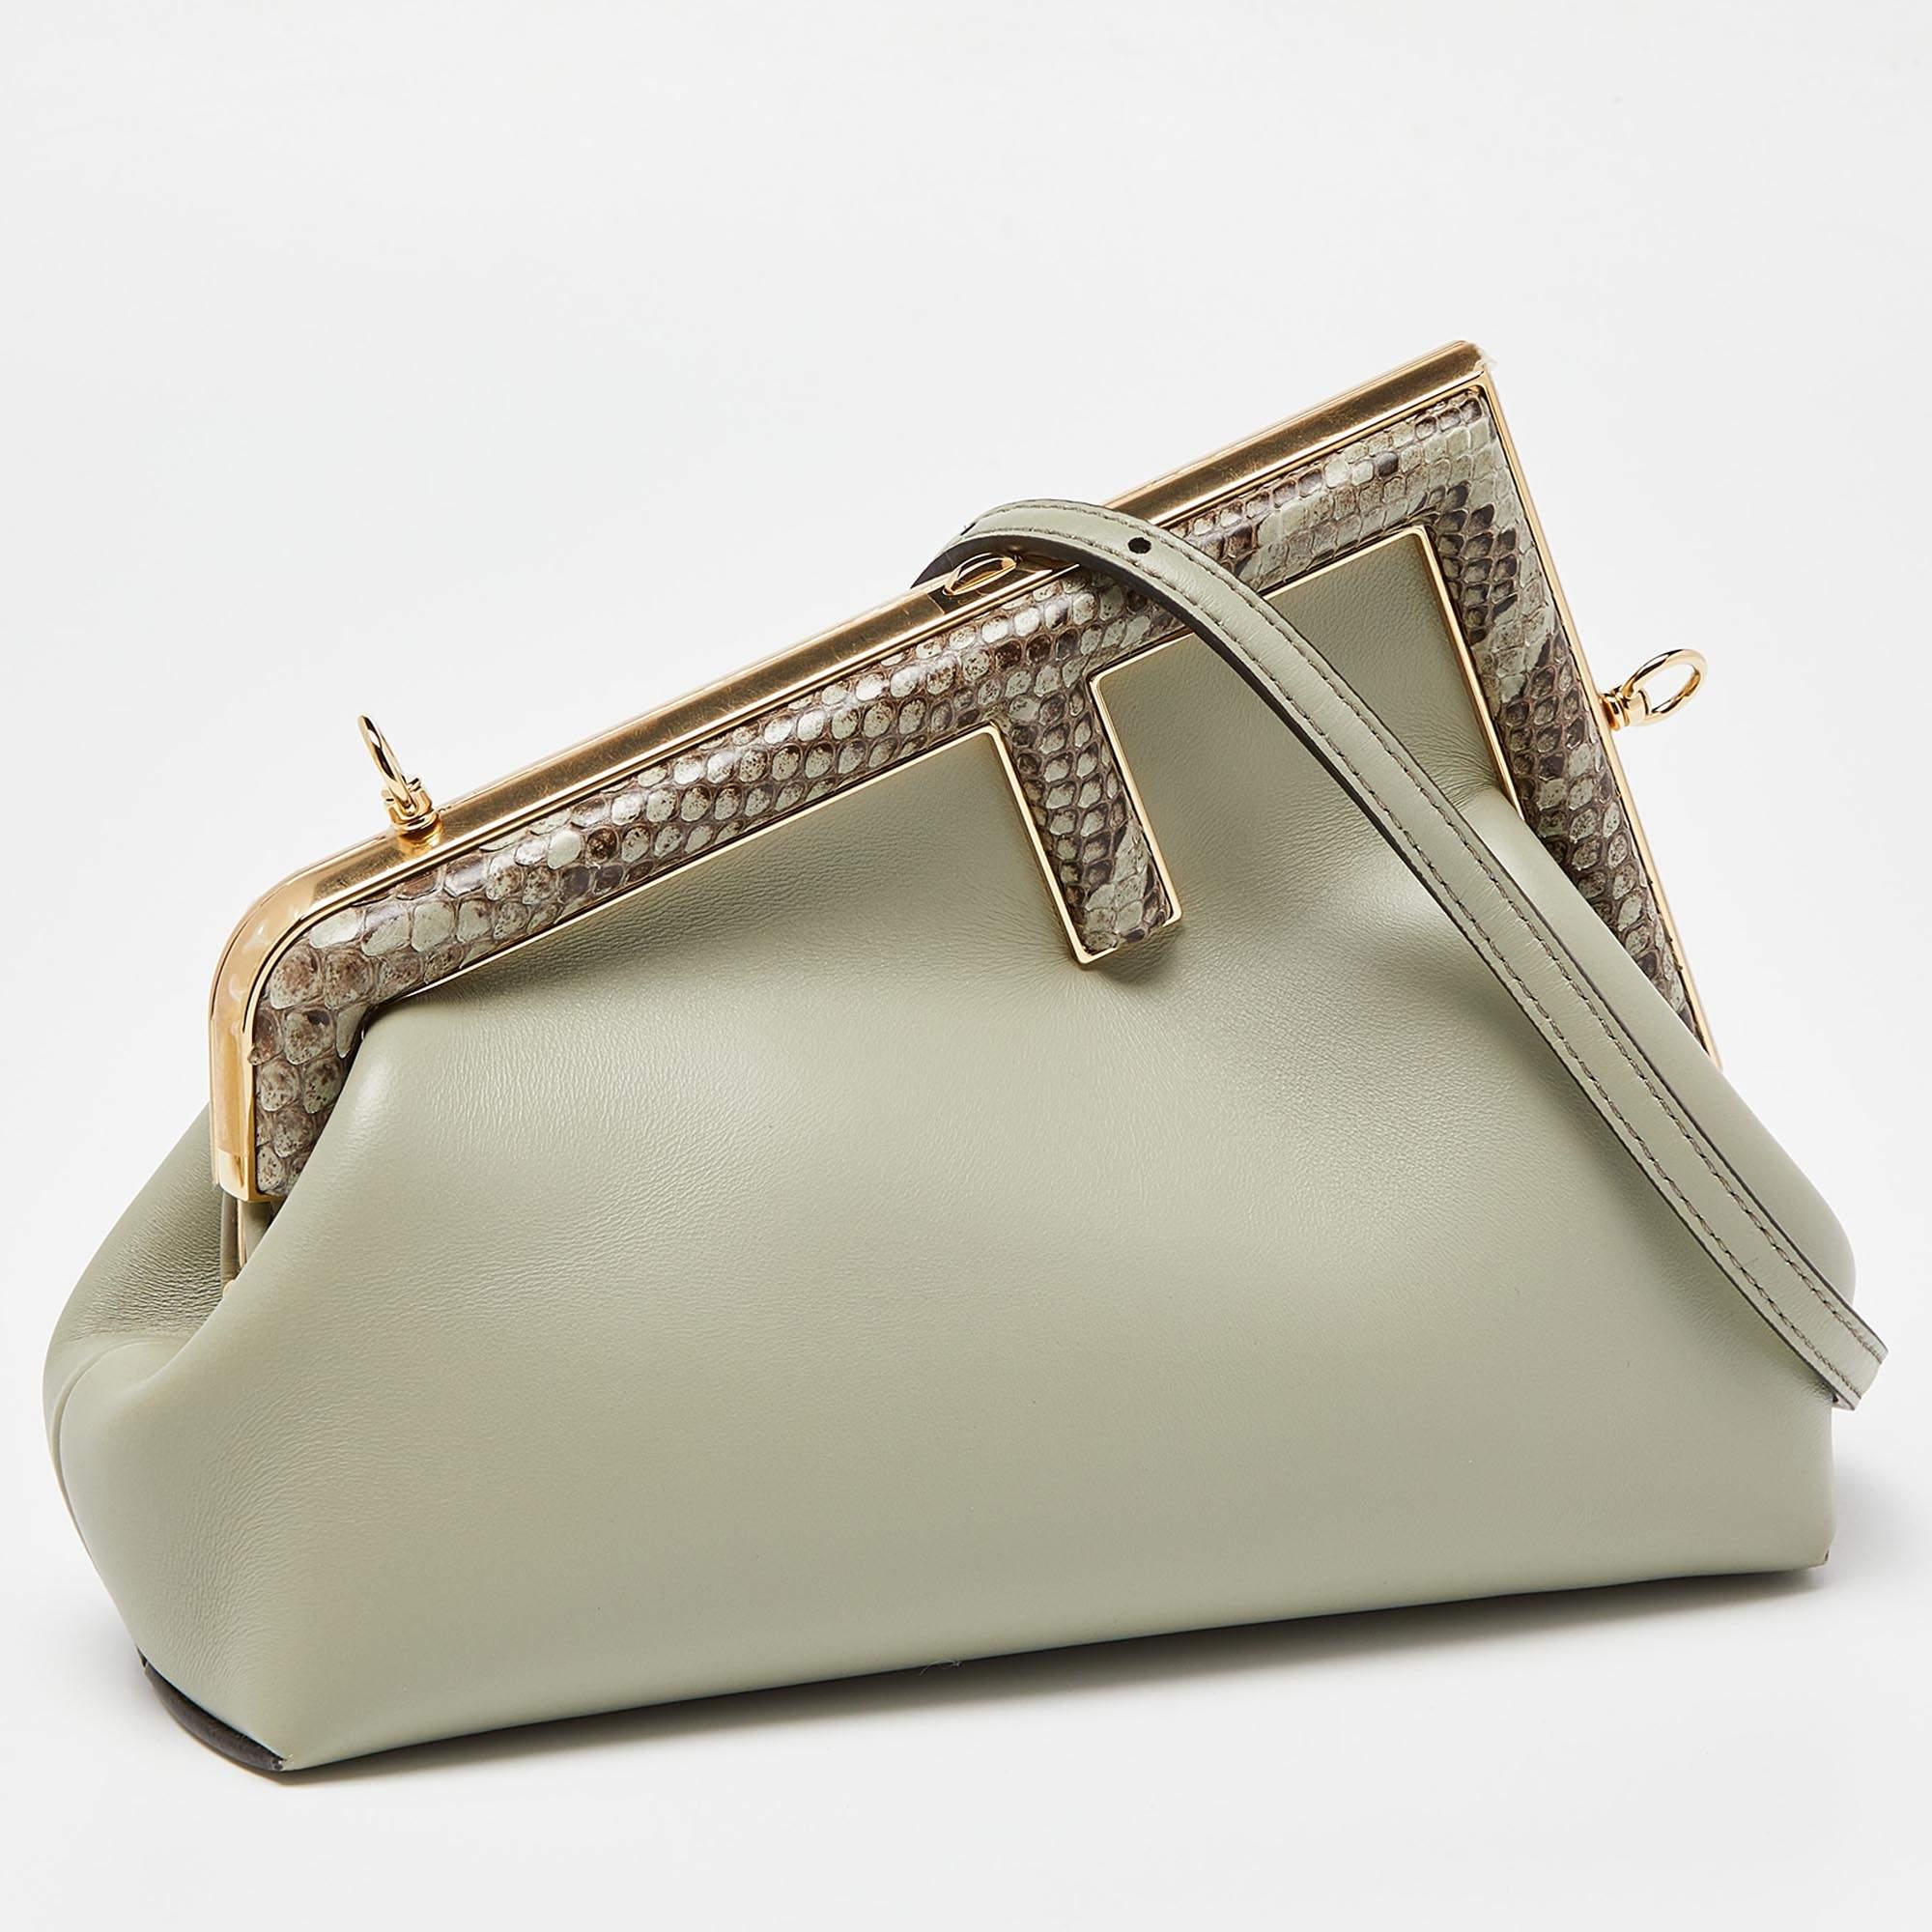 Invite the fashionable charm of the Fendi First clutch into your closet with this piece we have here. It is a small-sized First bag in beige leather and gold-tone hardware. The top F logo stands out beautifully, and the shoulder strap provides easy